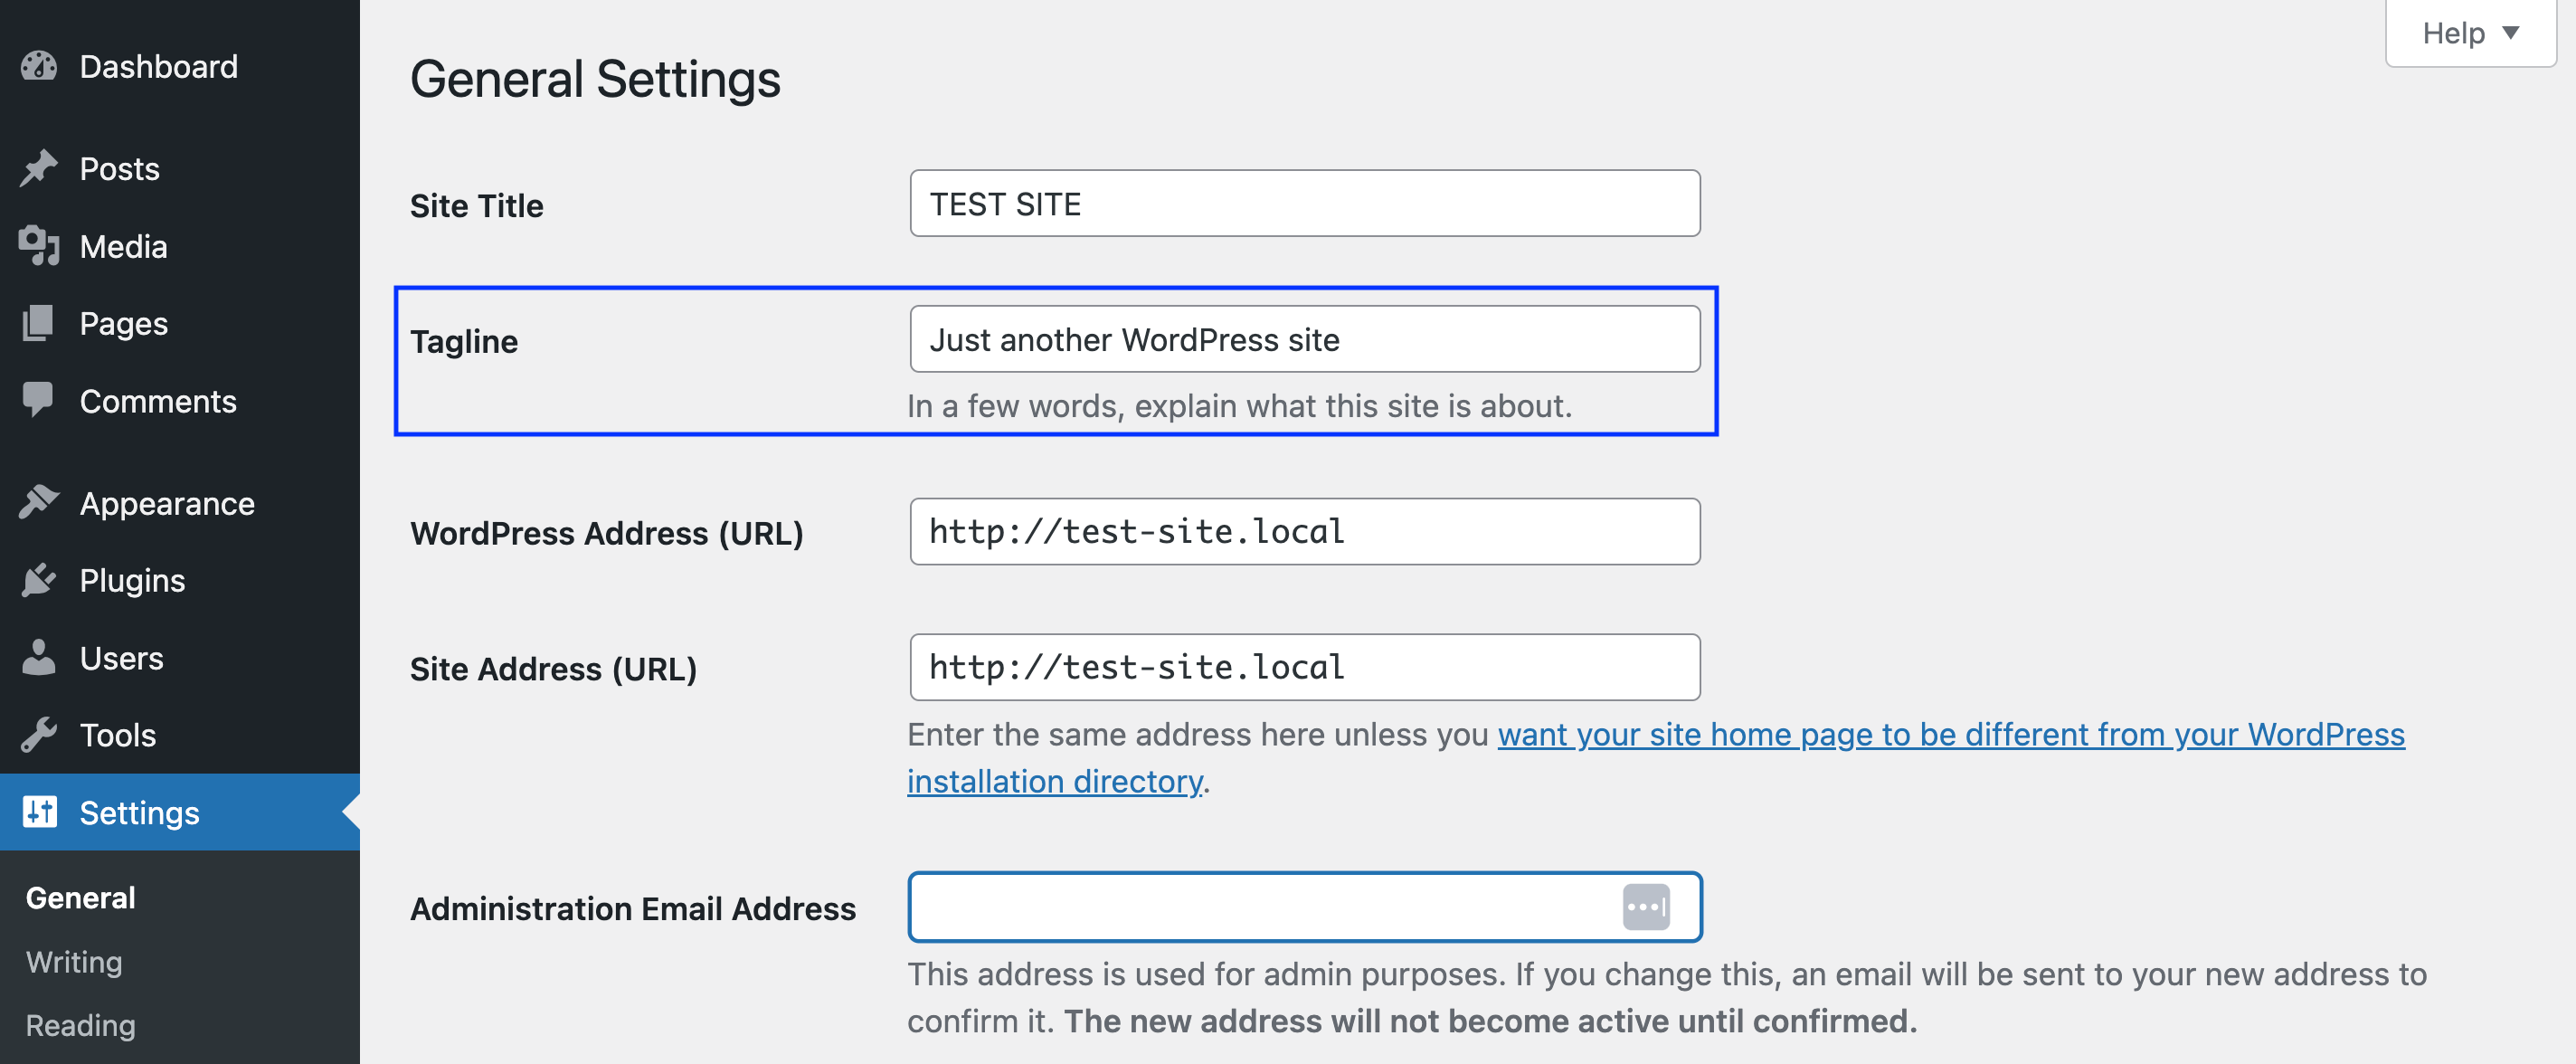 Change the "Just another WordPress site" tagline in WordPress settings.